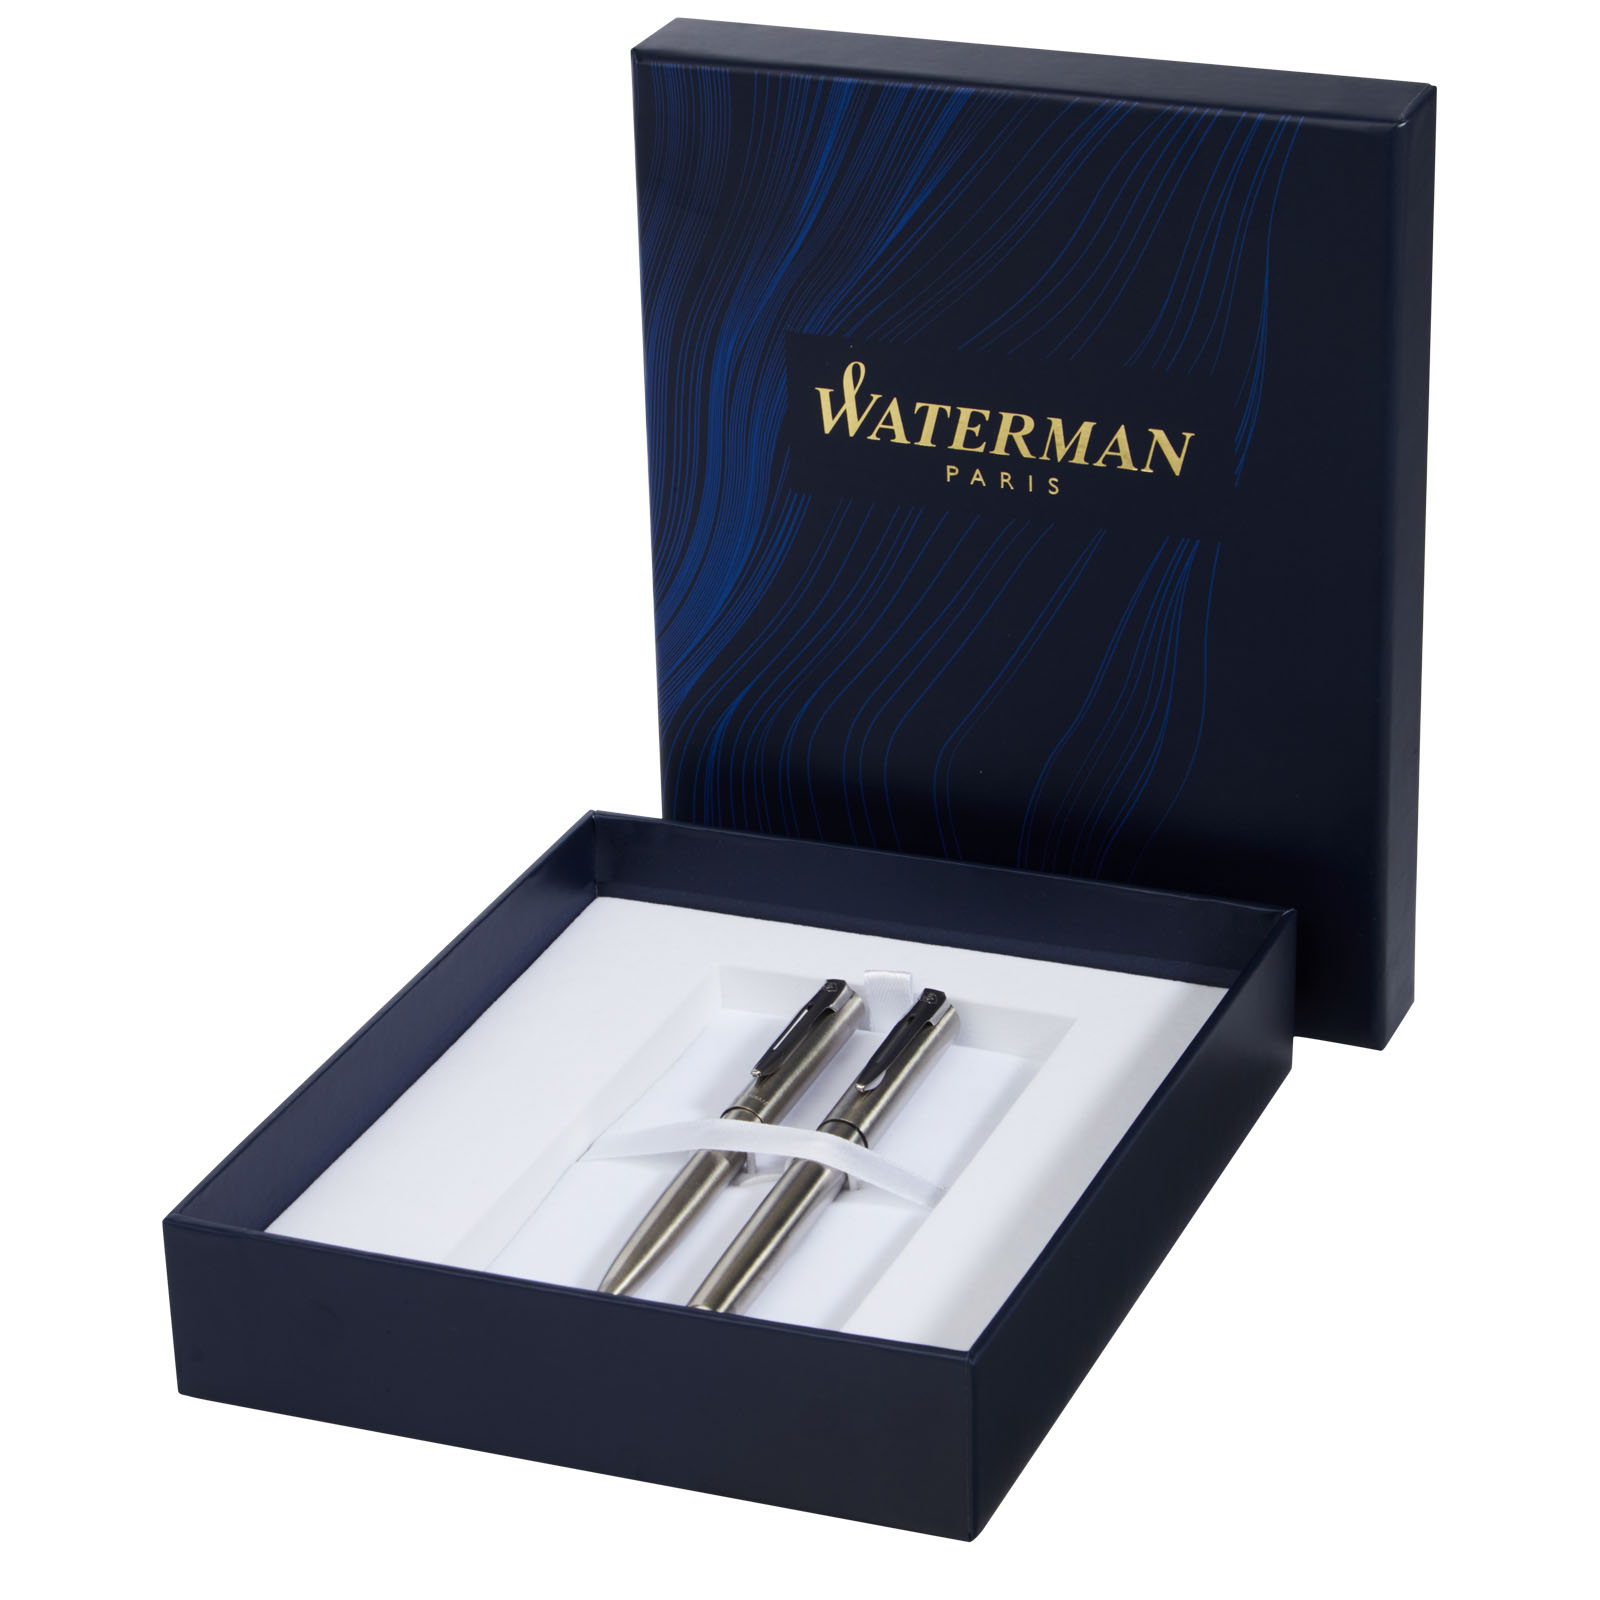 Advertising Other Pens & Writing Accessories - Waterman duo pen gift box - 3